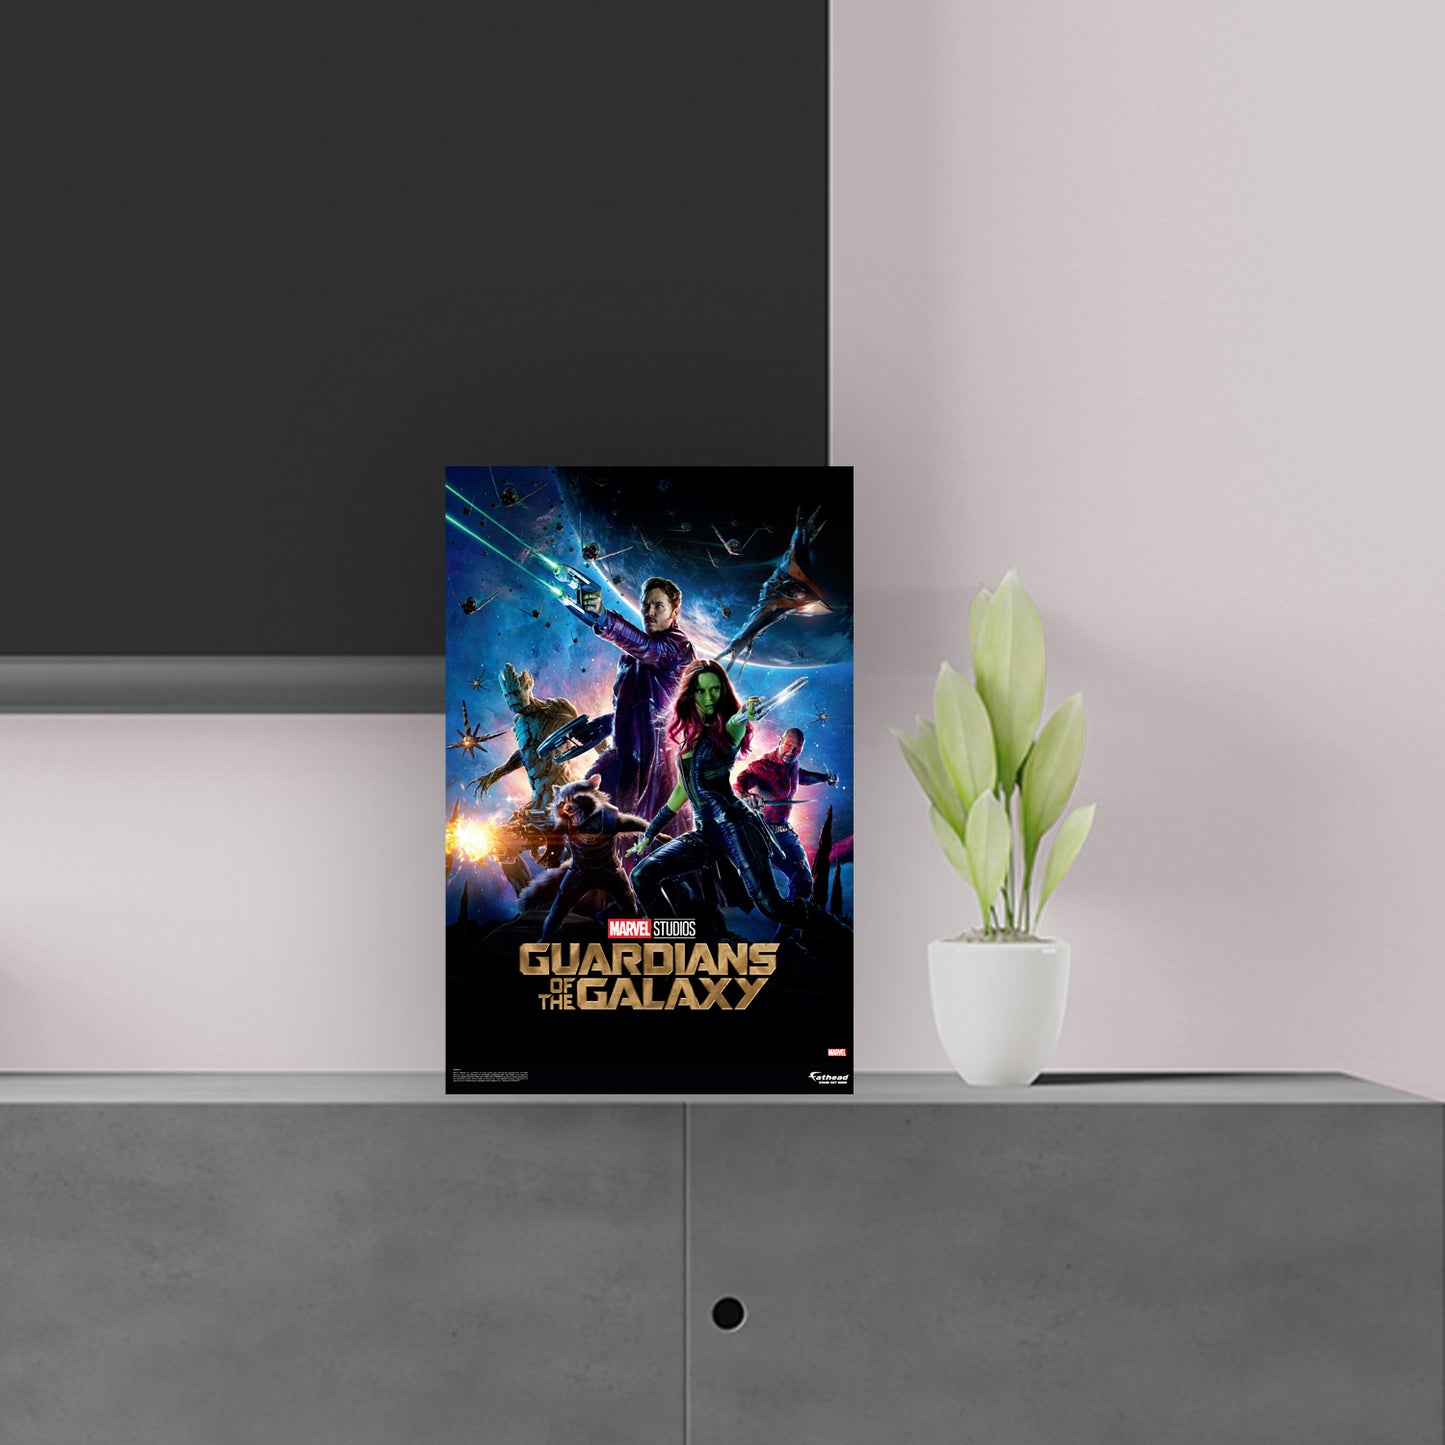 Guardians of the Galaxy: Guardians of the Galaxy Poster Mini Cardstock Cutout - Officially Licensed Marvel Stand Out